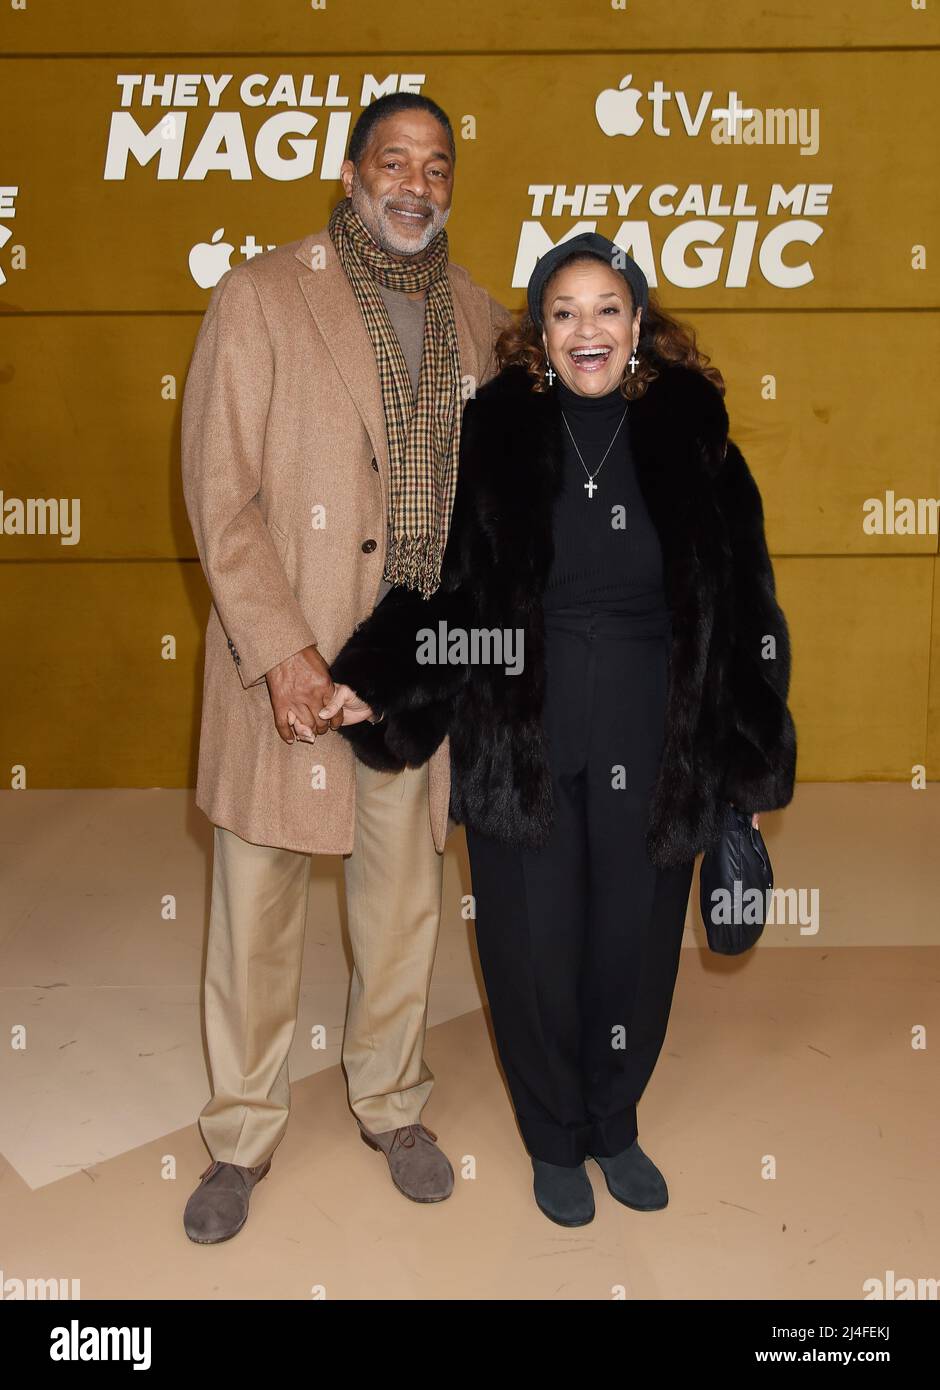 Norm Nixon, Debbie Allen, and Magic Johnson attend the Los Angeles News  Photo - Getty Images